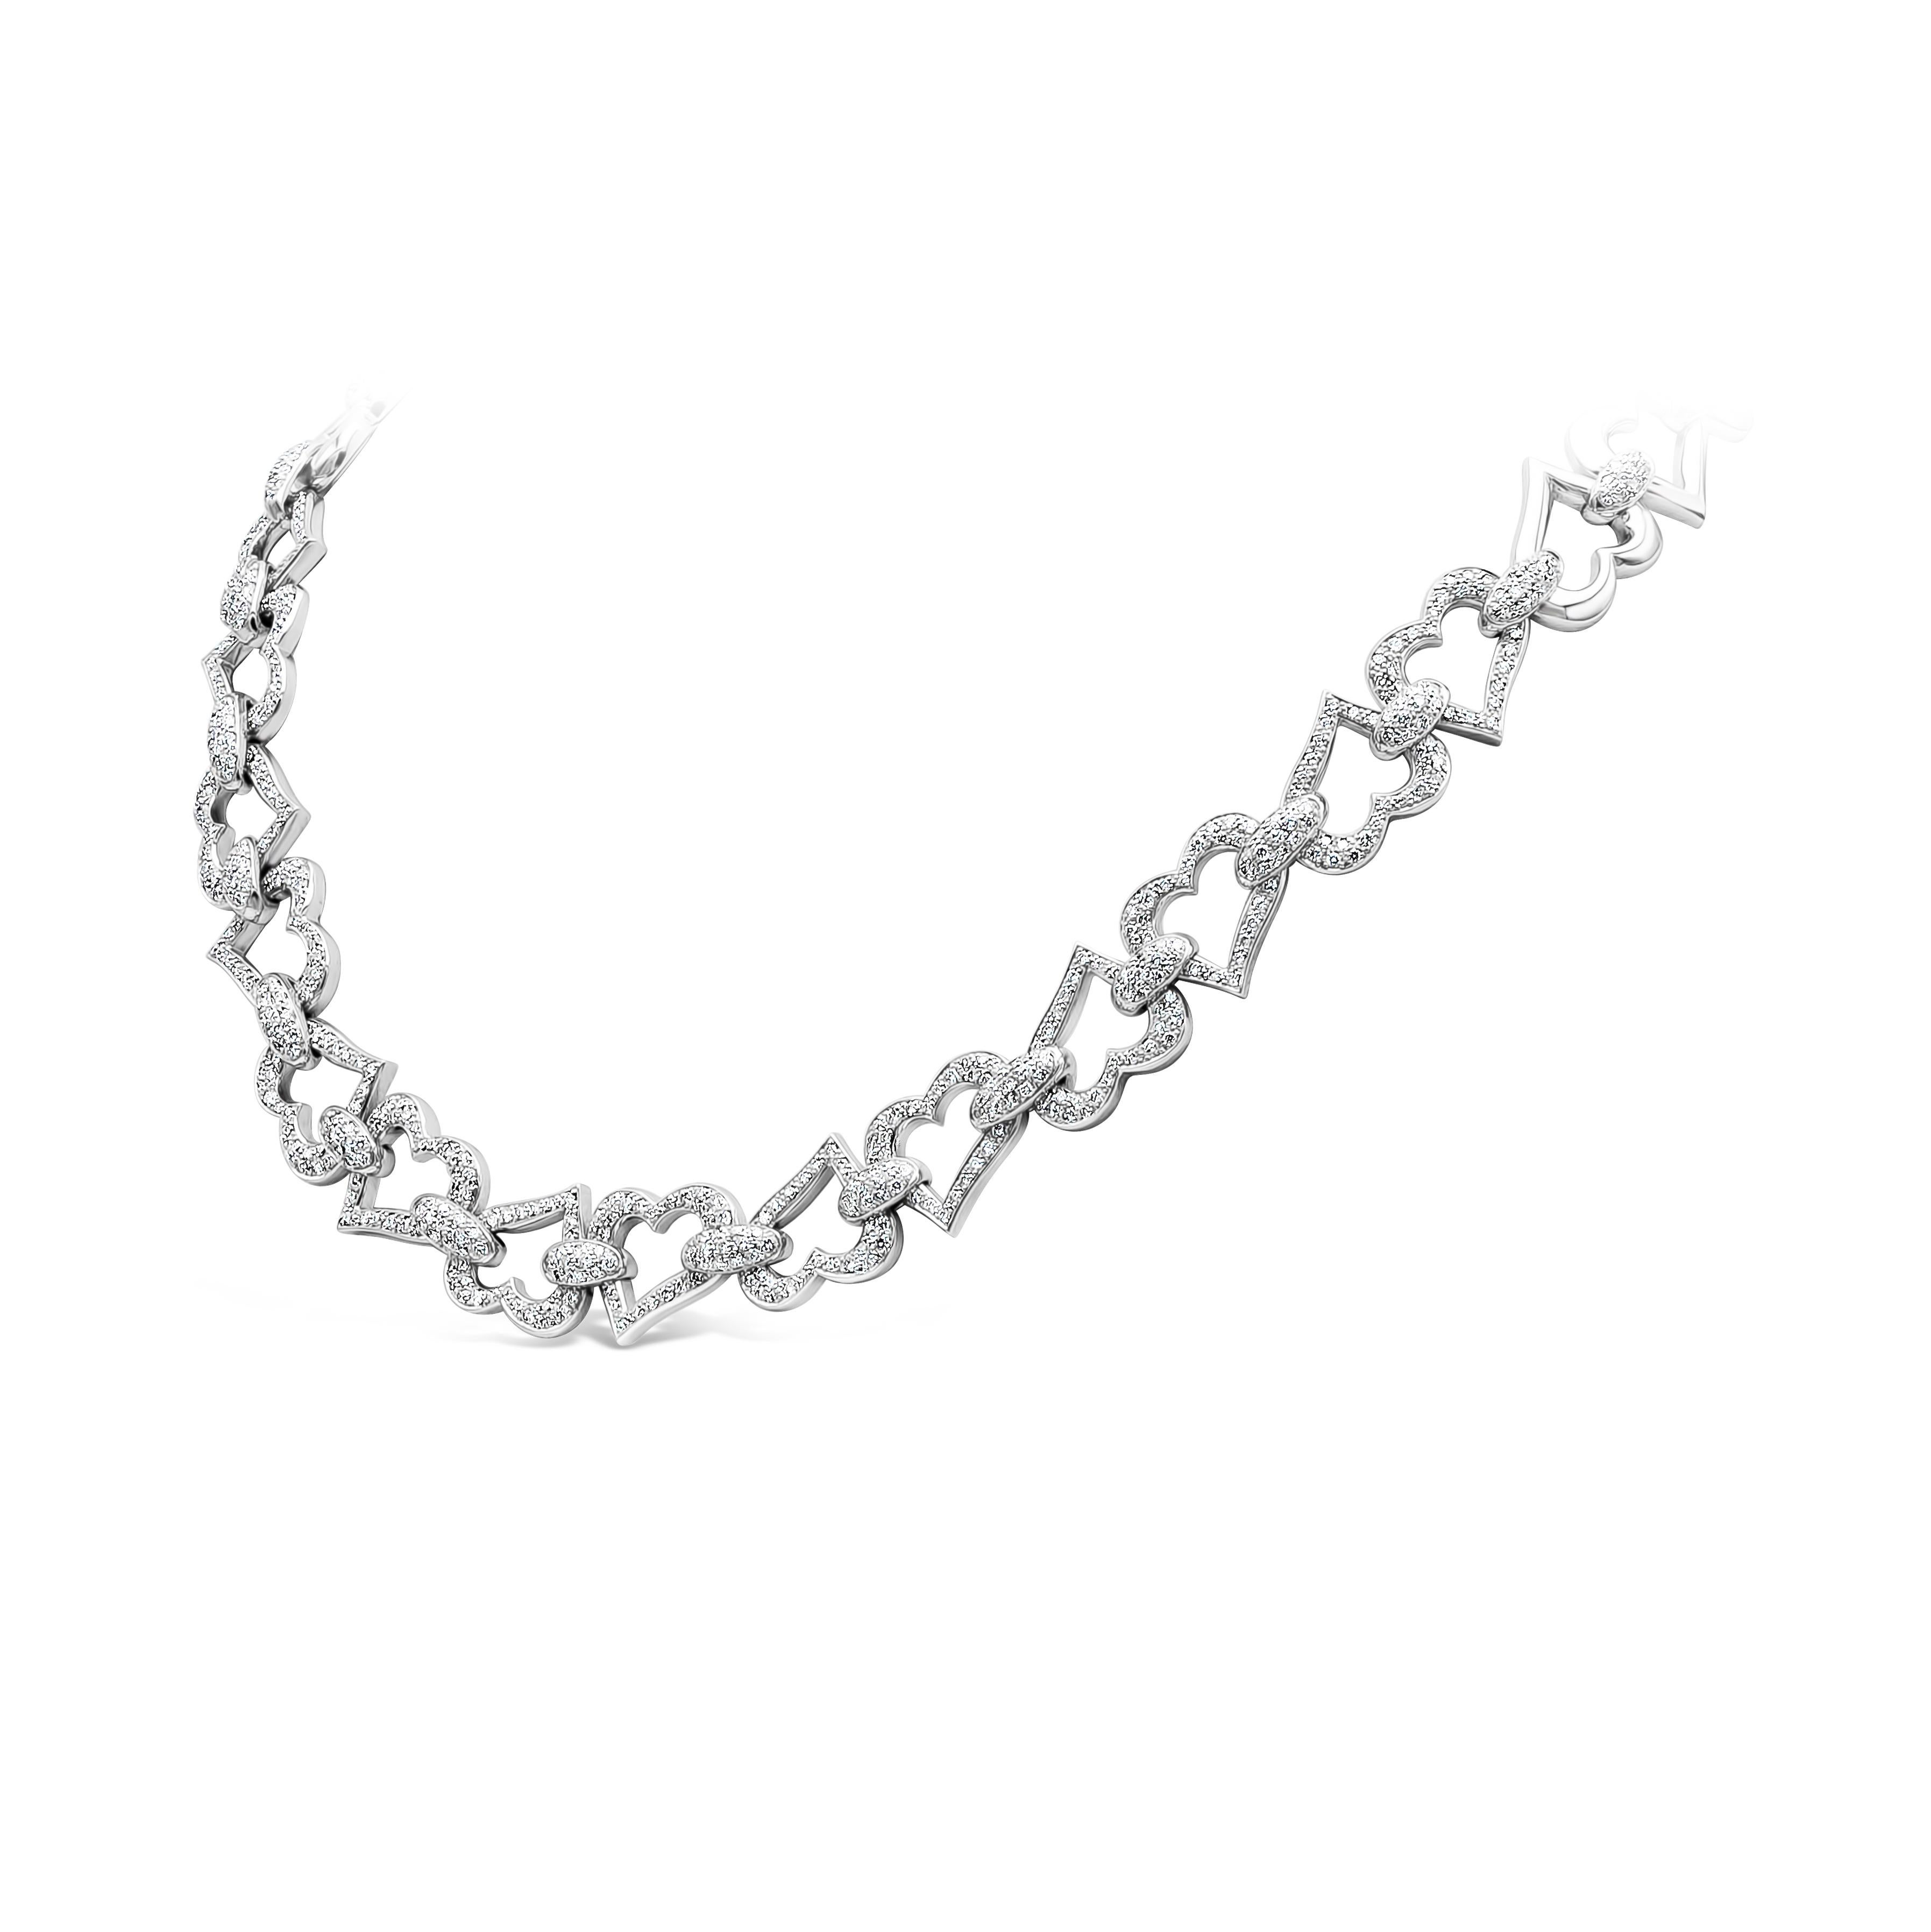 A unique and charming heart shape link necklace, featuring 653 pieces of round shape diamonds weighing 5.80 carats total with D-G color and VVS clarity. The heart links are approximately 0.51 inches wide and made with 18K white gold. Exquisitely